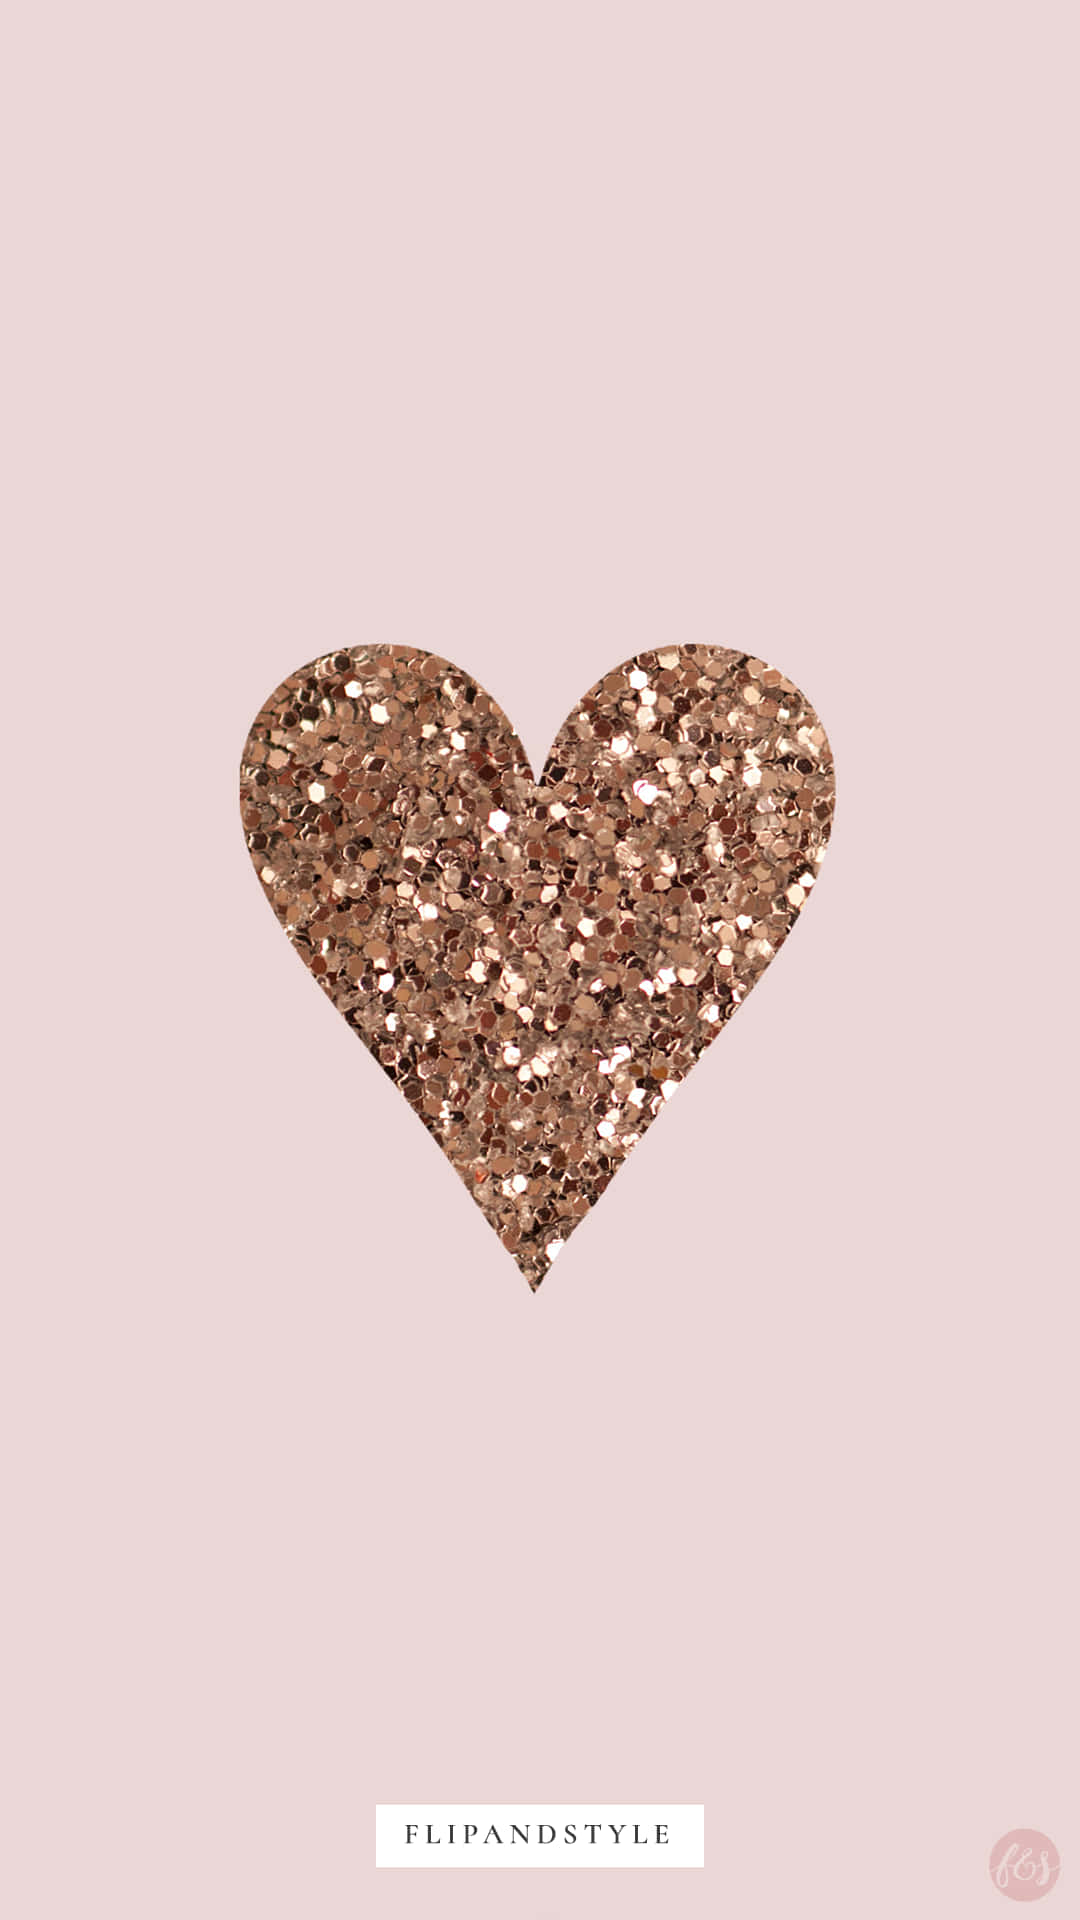 A Heart Made Of Gold Glitter On A Pink Background Wallpaper